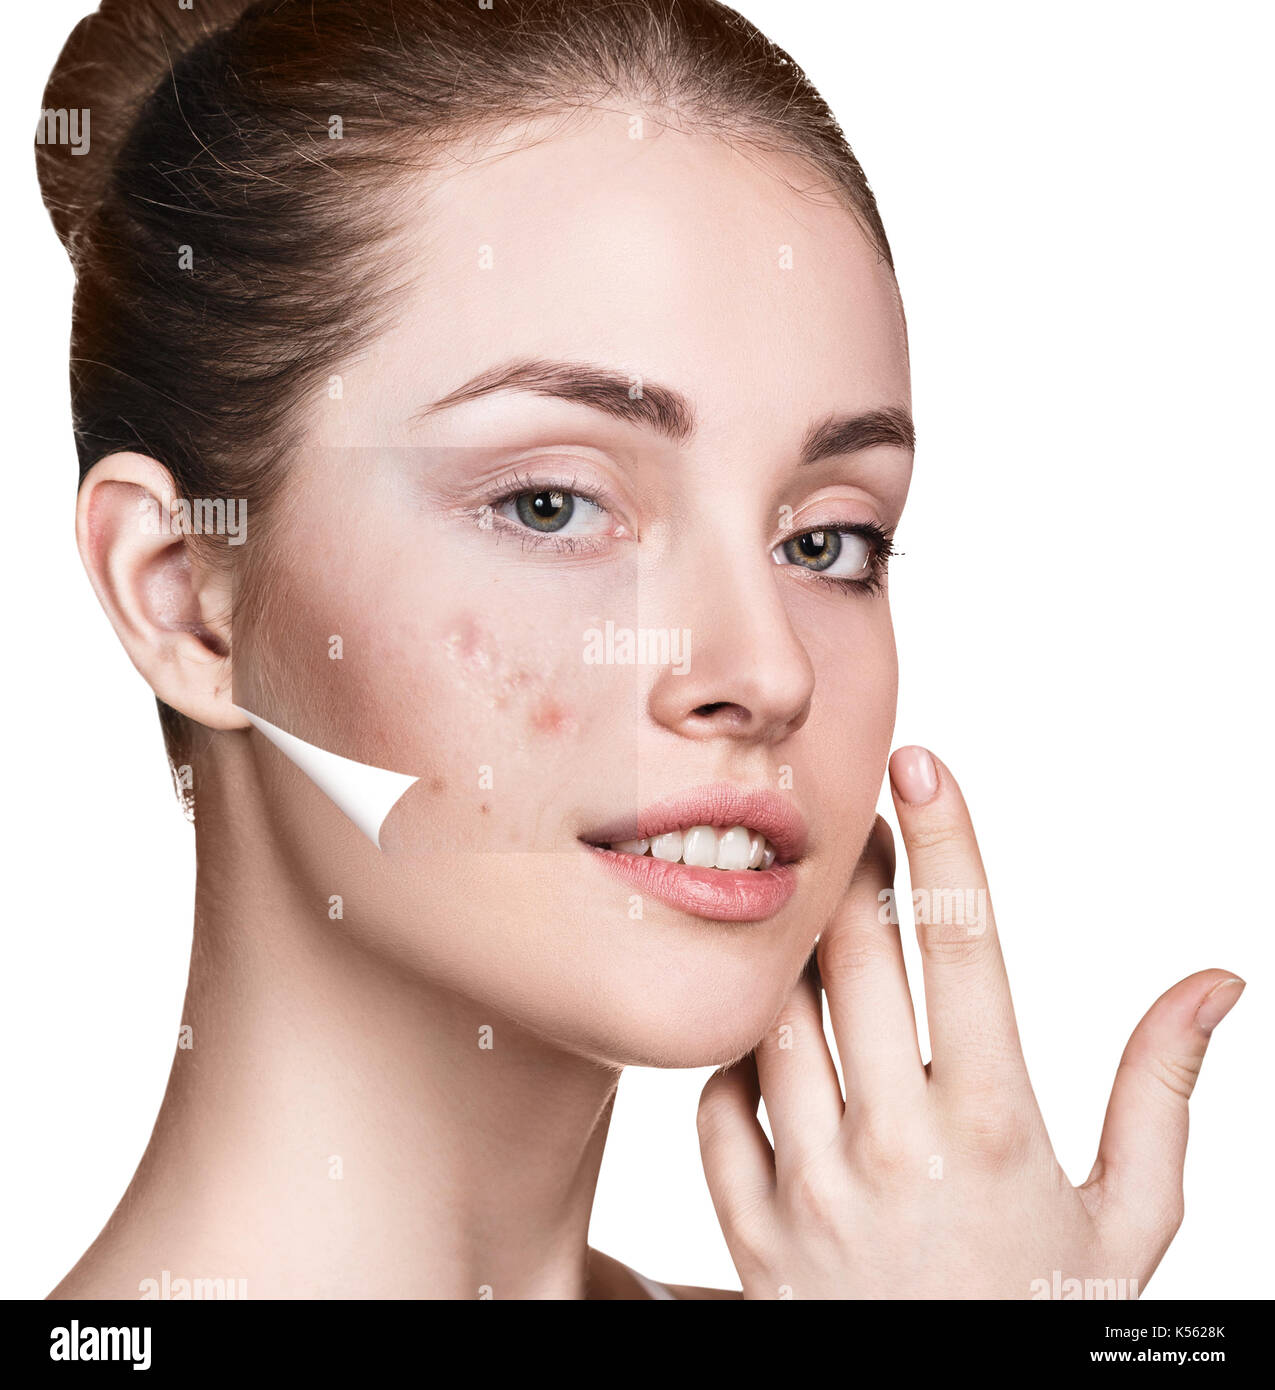 Layer with acne unstick from good healthy skin of young woman. Stock Photo